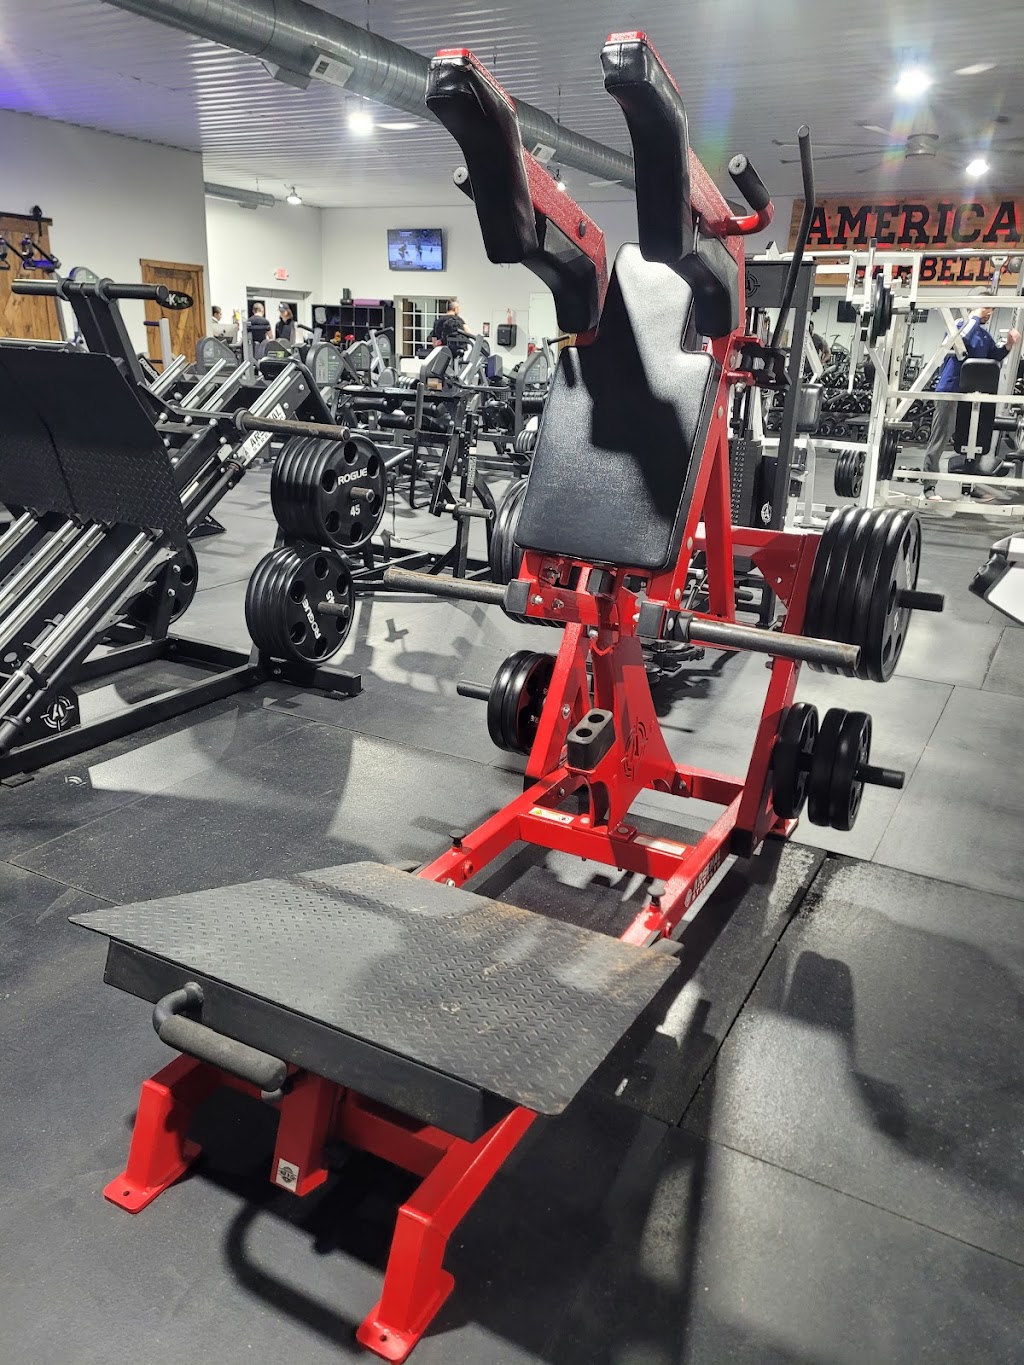 American Barbell | 9099 Basil Western Rd, Canal Winchester, OH 43110 | Phone: (614) 828-8100